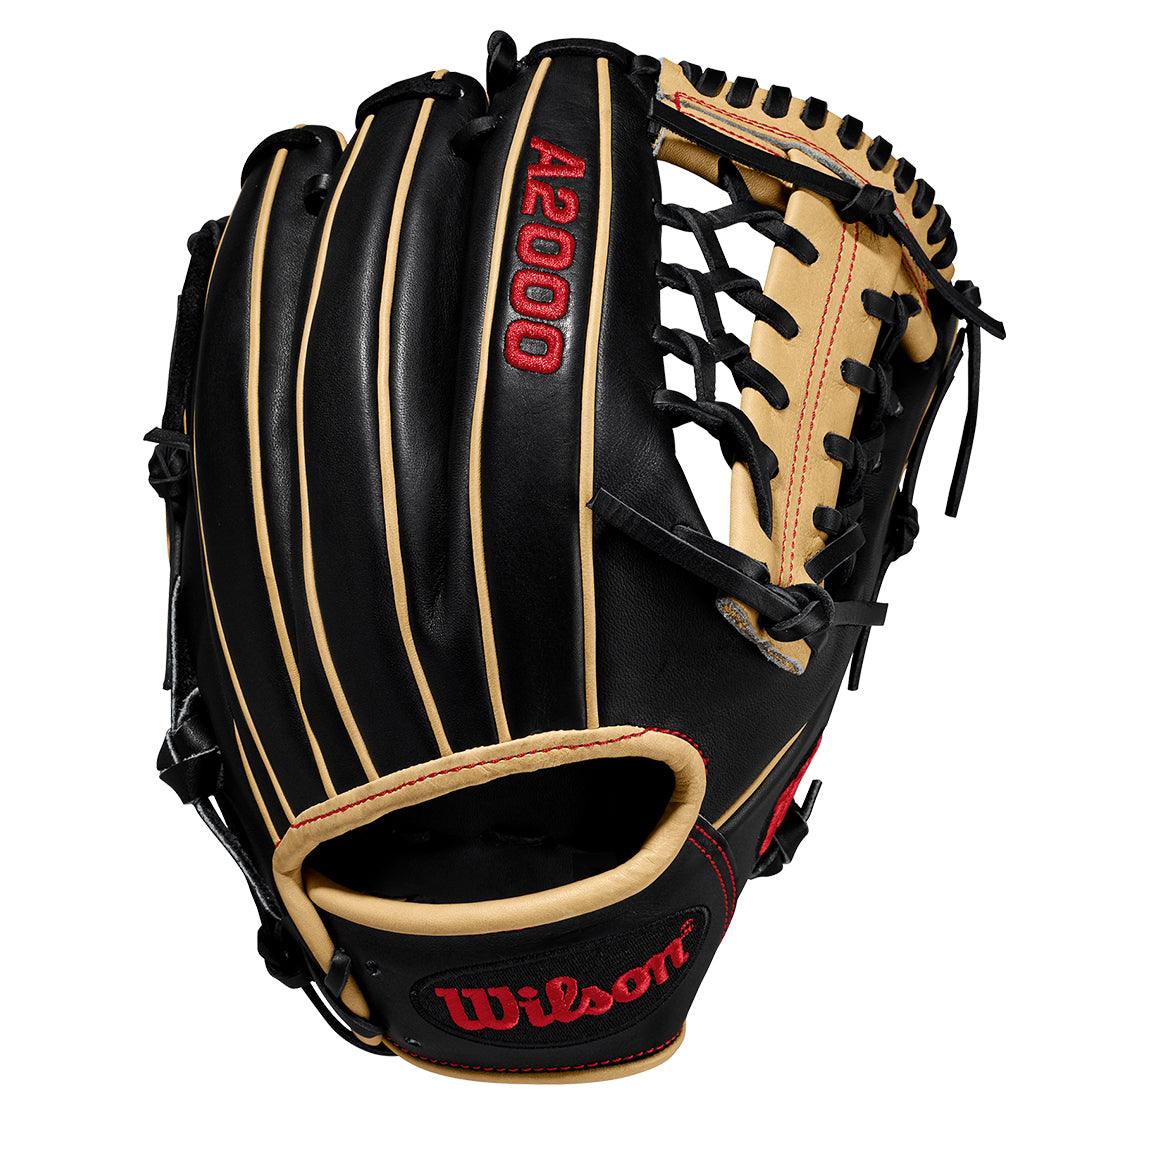 A2000 Glove 1789 11.5" - Sports Excellence